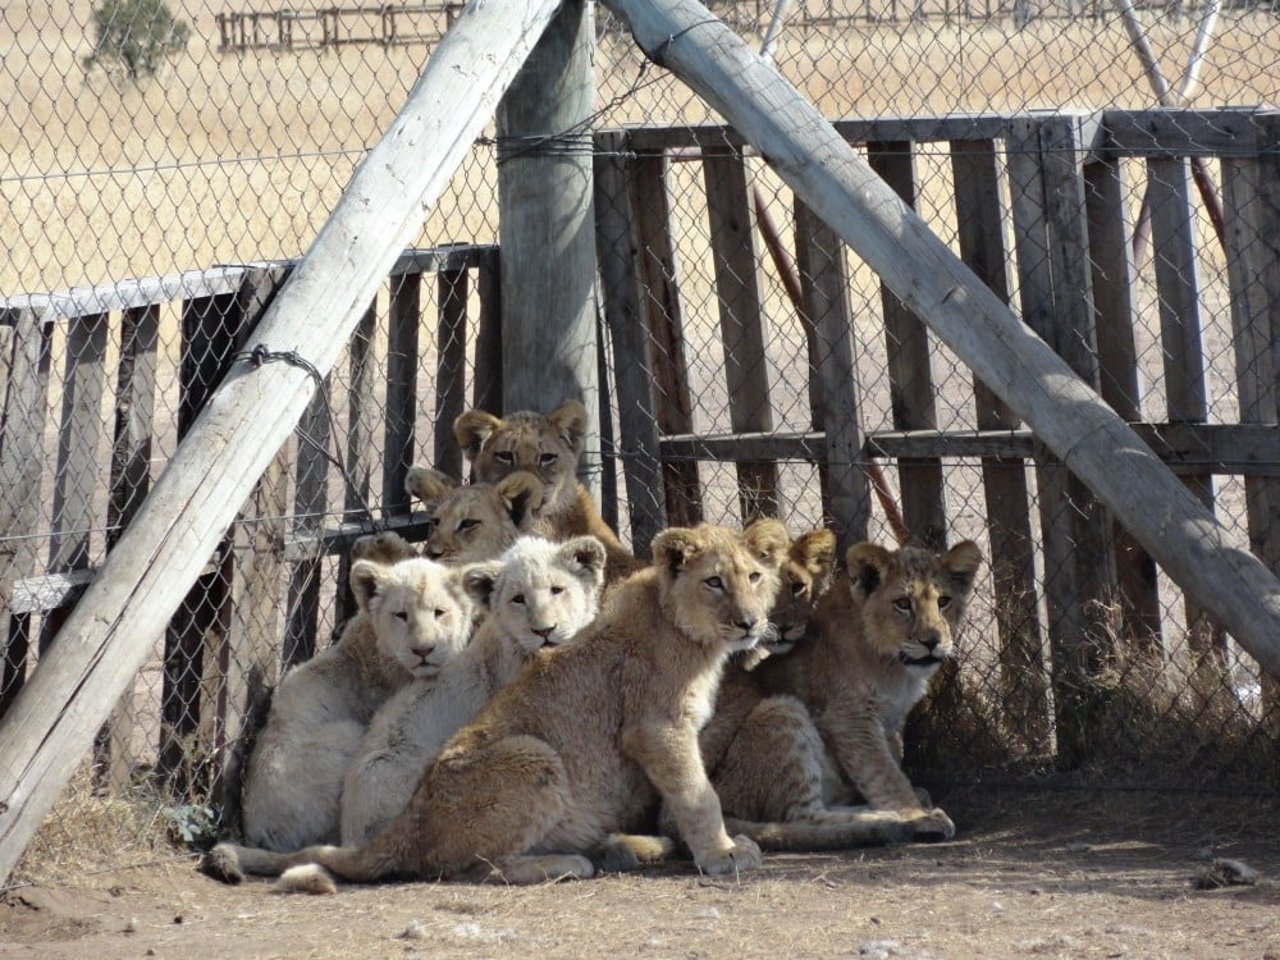 Lion cubs huddled together at a facility in South Africa - Traditional Chinese Medicine - World Animal Protection